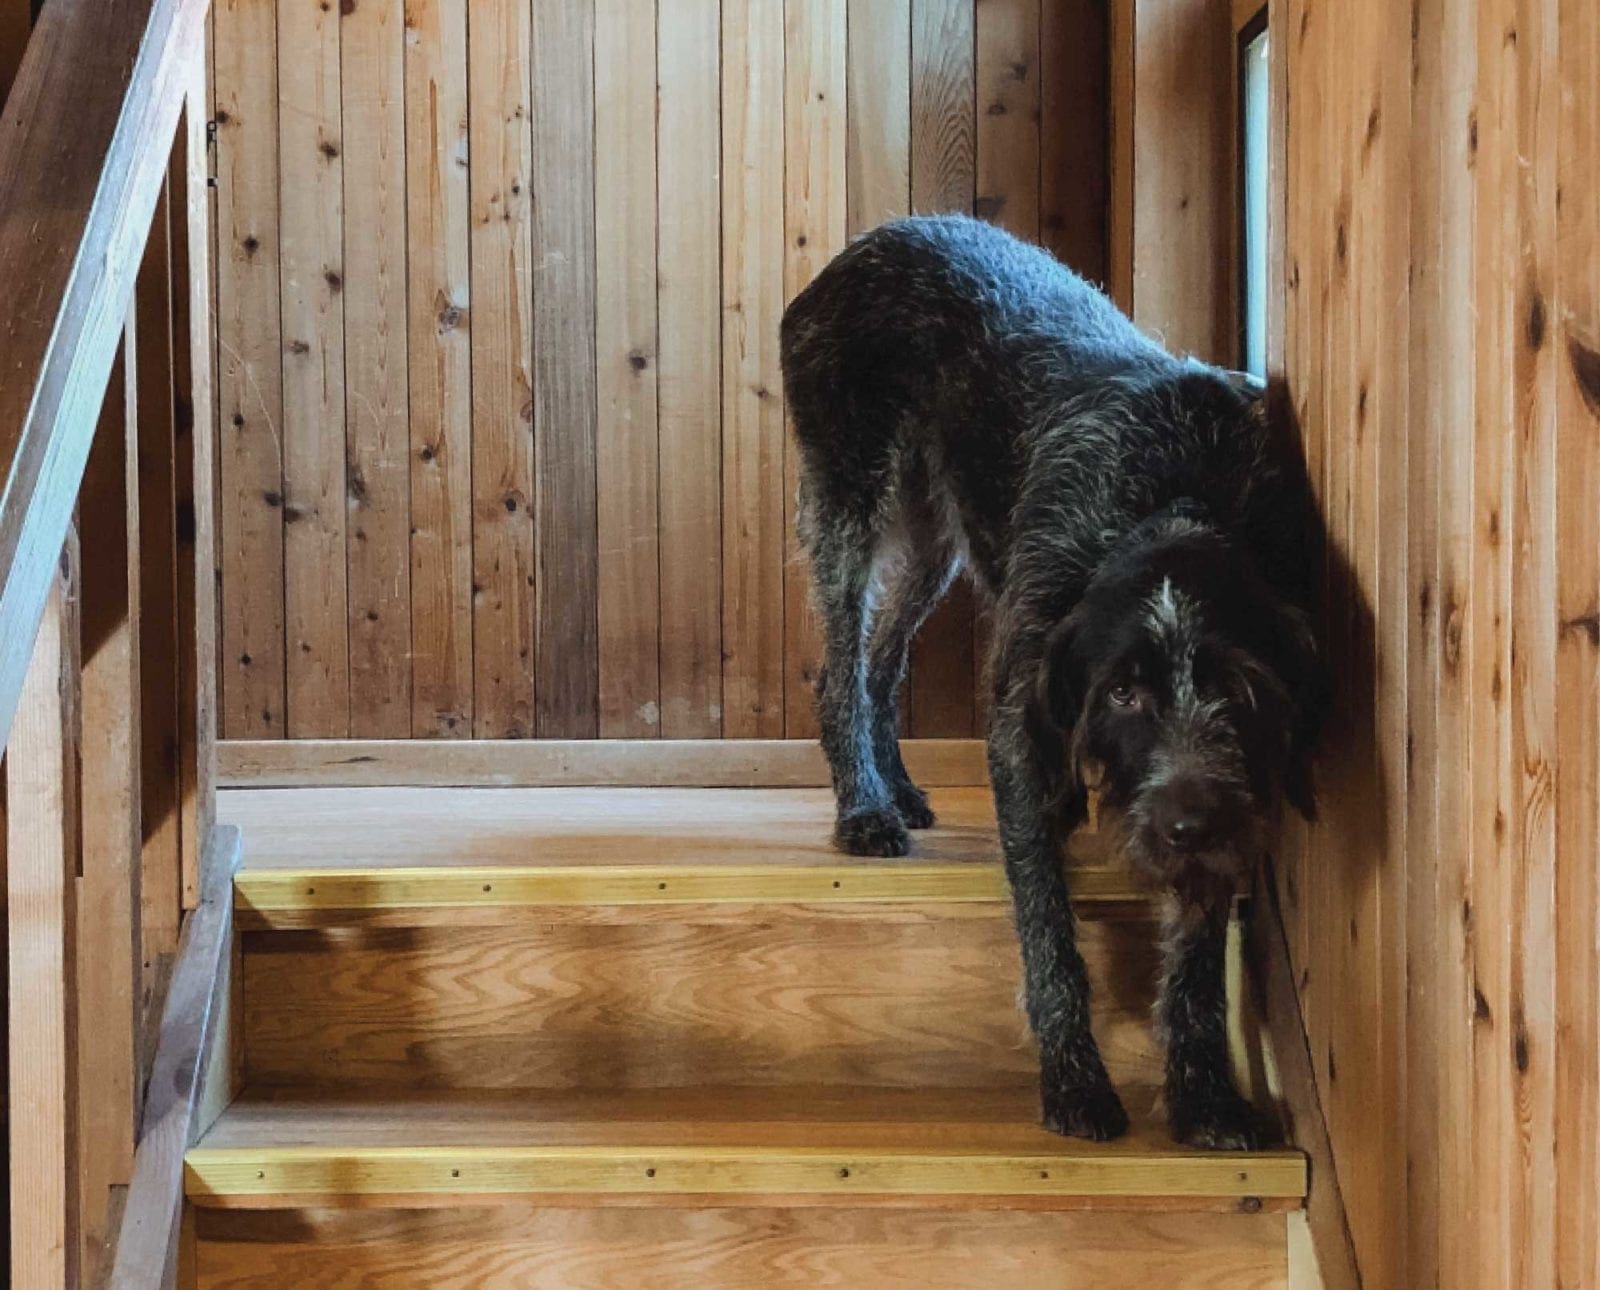 A bird dog on a staircase during whoa training.